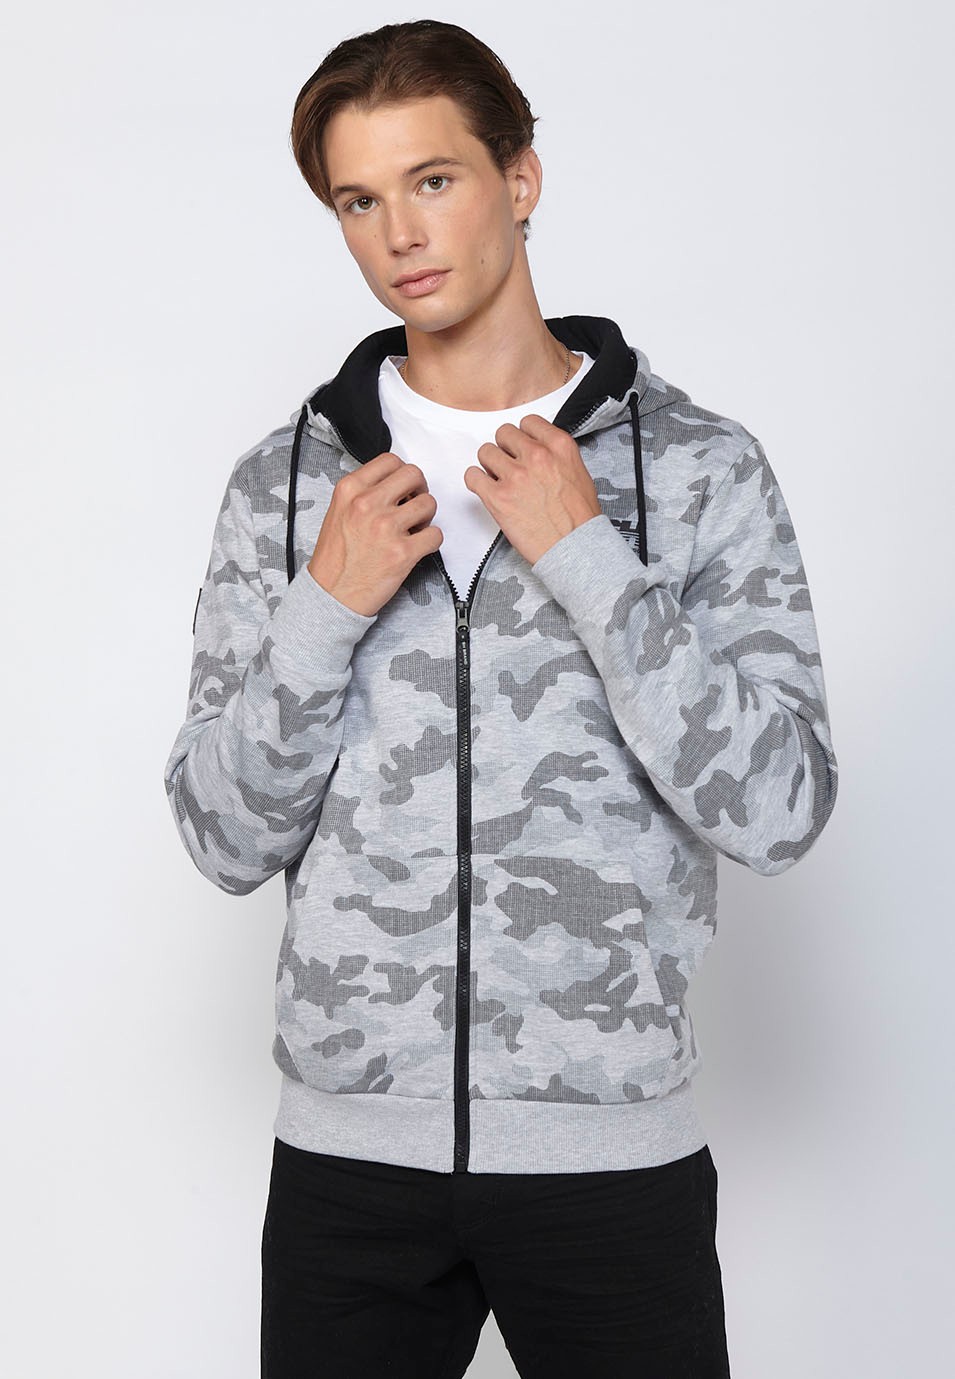 Long-sleeved sweatshirt jacket with adjustable hooded collar with drawstring and front zipper closure in Navy for Men